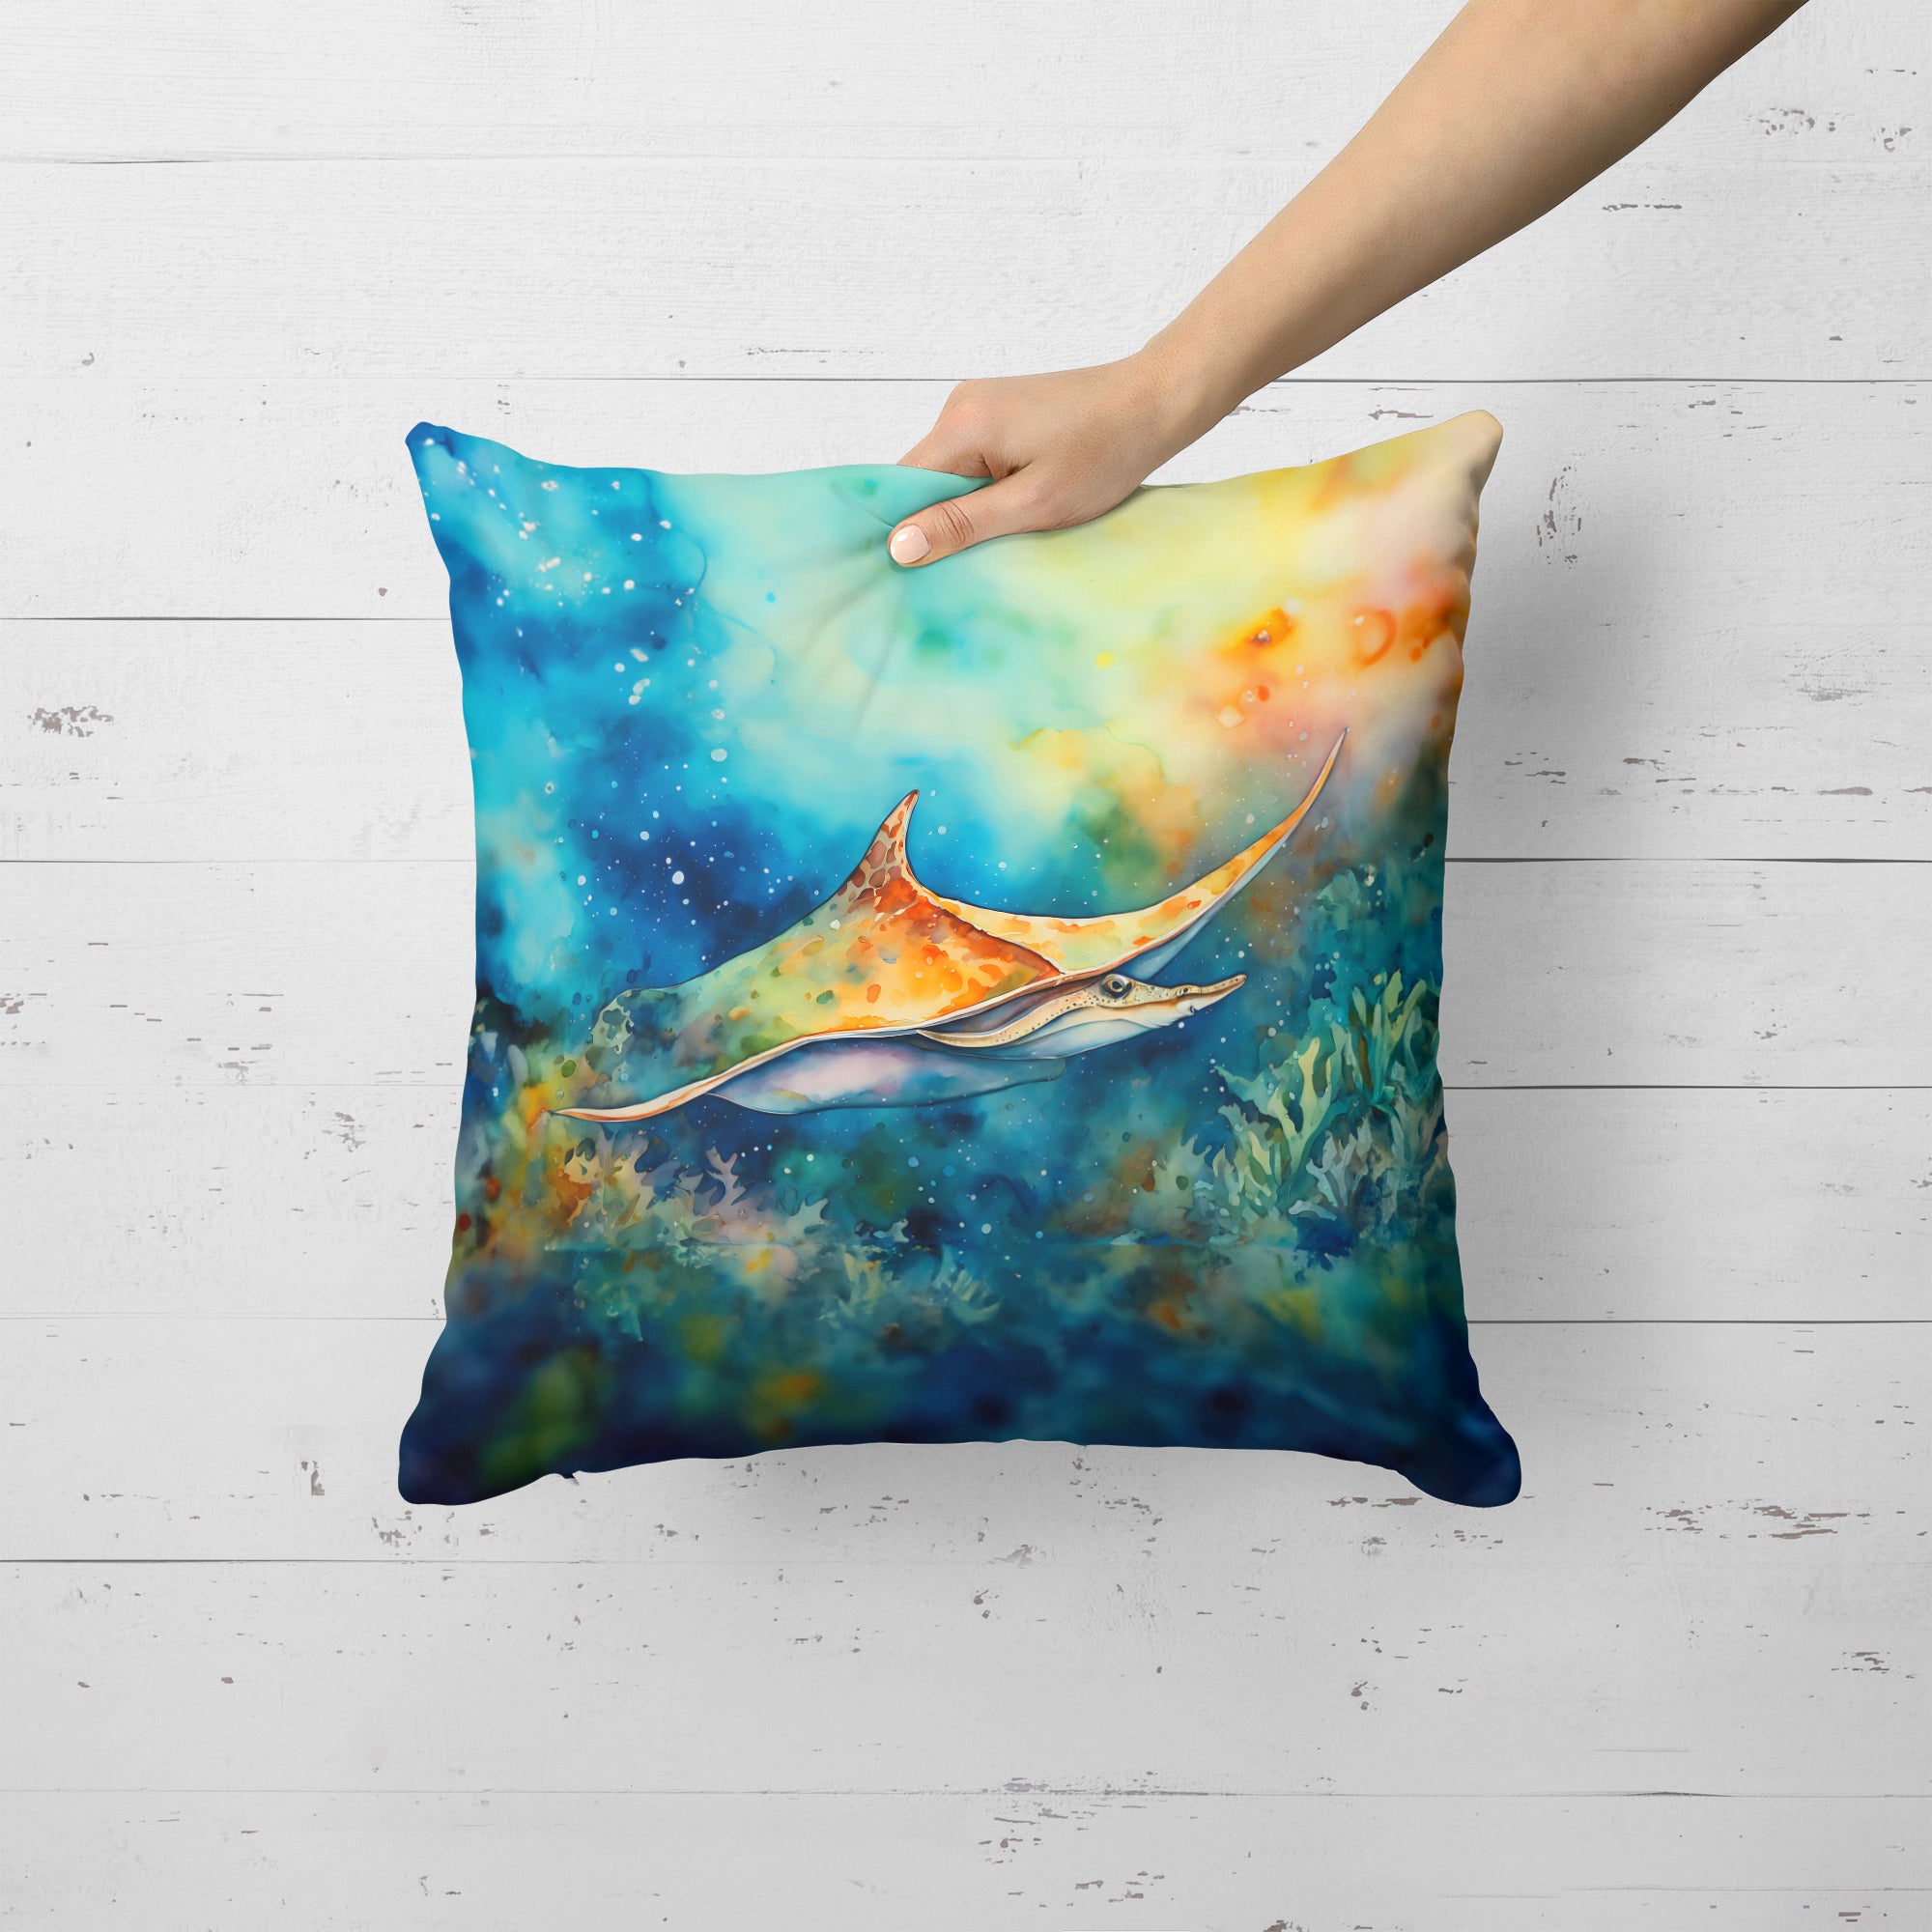 Buy this Sting Ray Throw Pillow